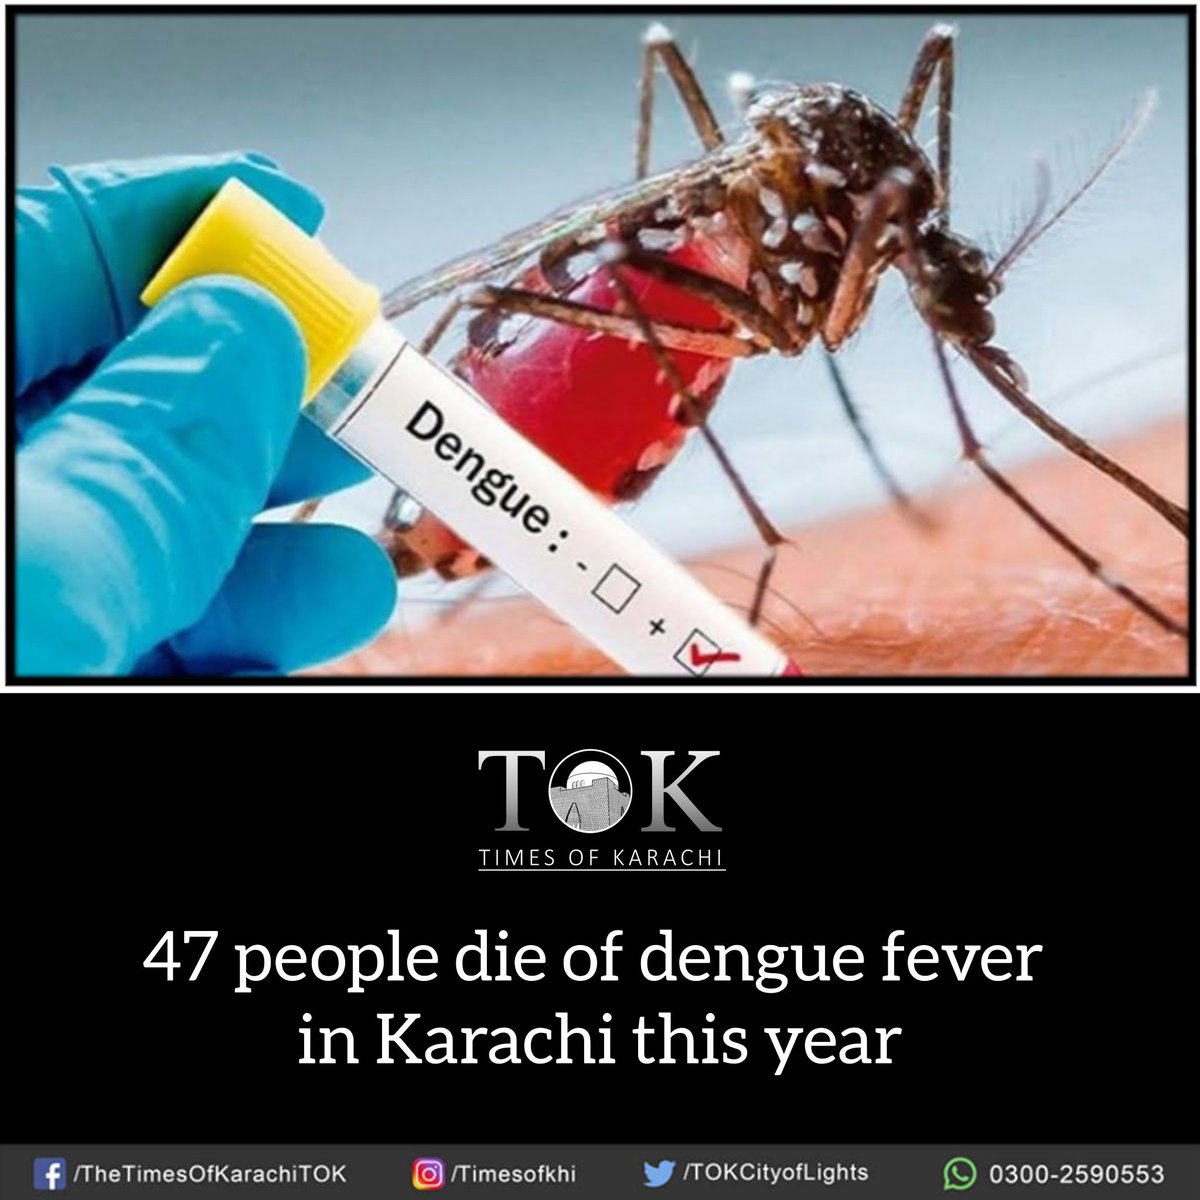 ALERT: The Vector-Borne Diseases (VBD) Department of Directorate General Health Services Sindh confirmed that the #Dengue viral fever has claimed one more life in Karachi's district East, taking the death toll from this mosquito-borne disease to 47 in #Karachi this year so far.